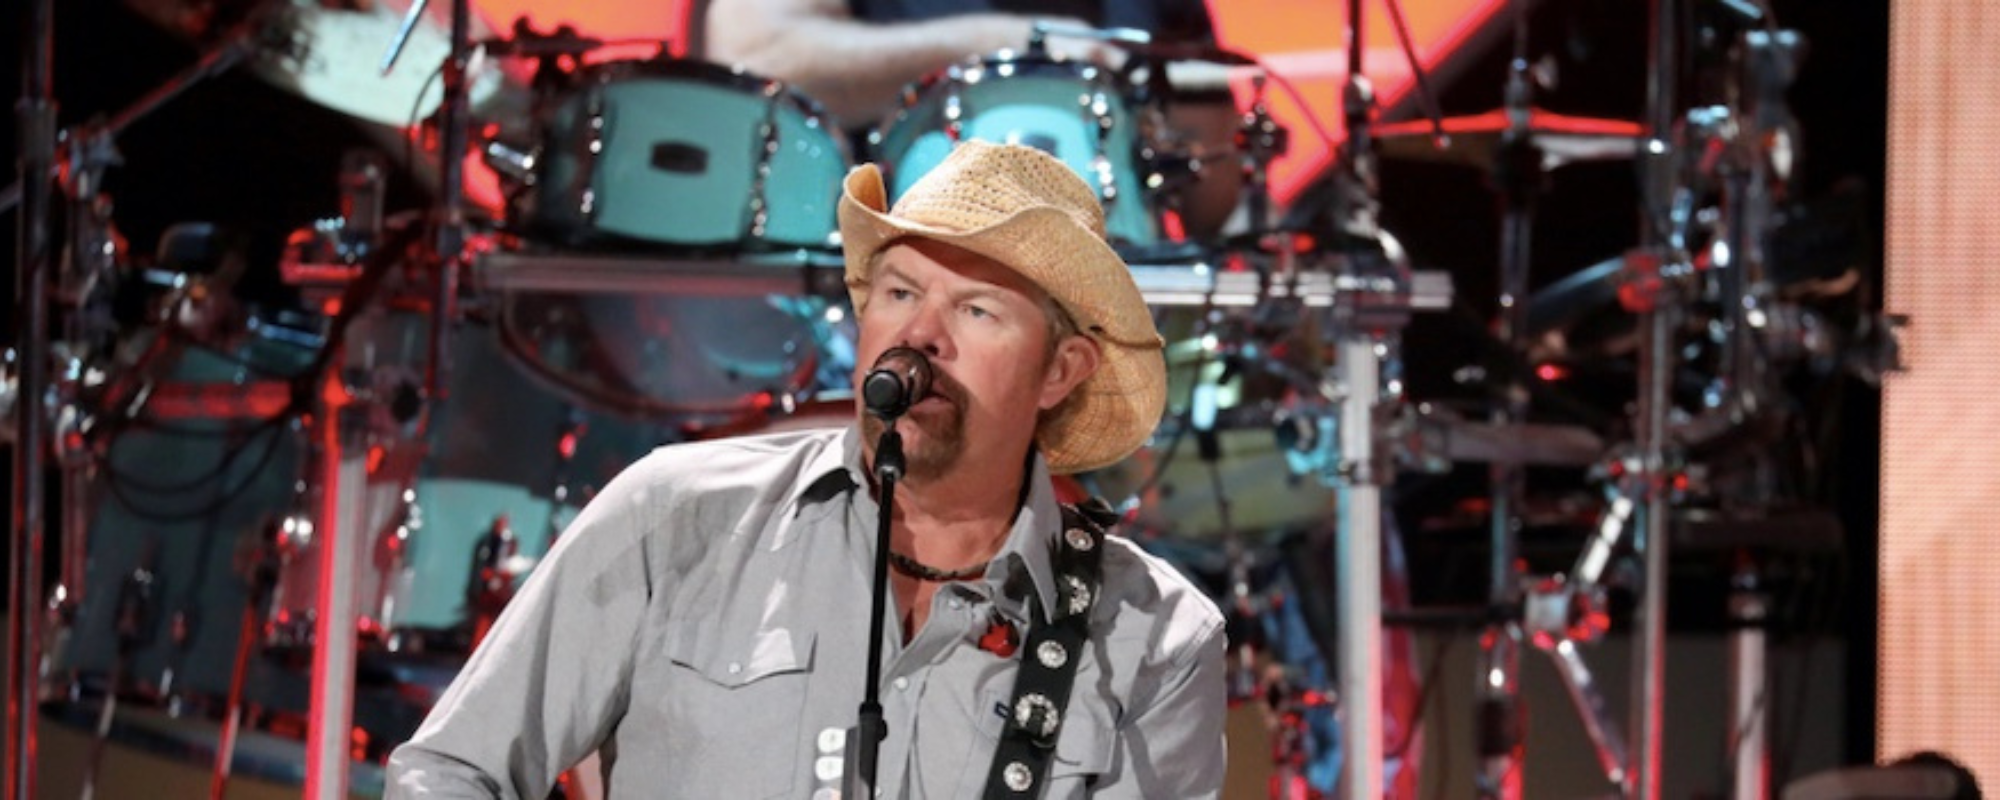 Toby Keith Gives the Fans What They Want, Releases “Don’t Let the Old Man In” to Country Radio